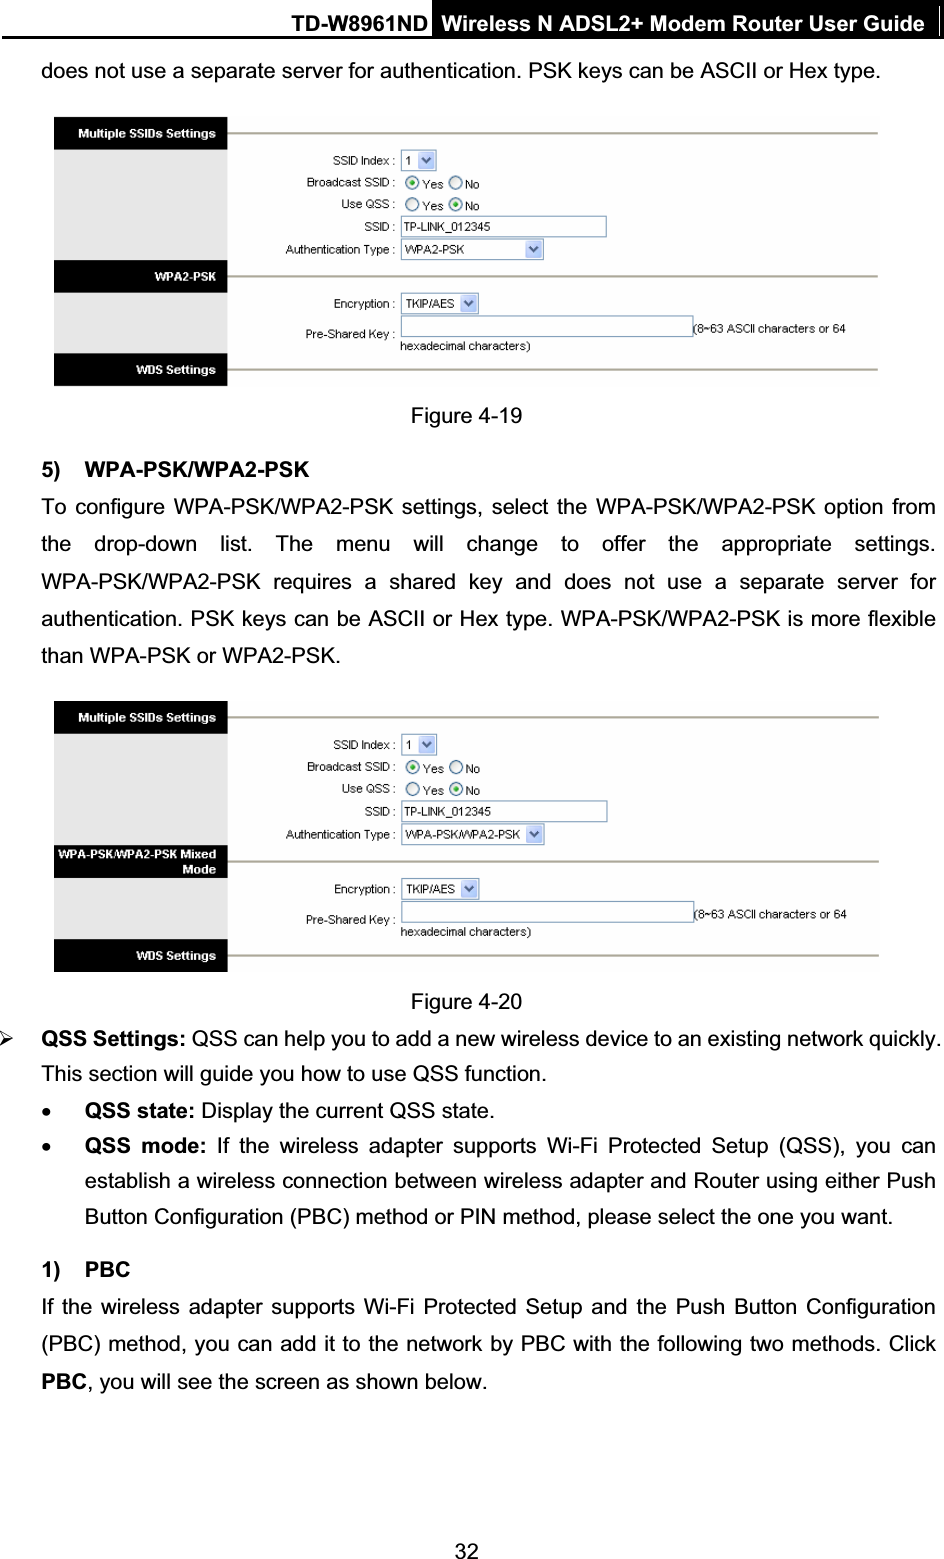 TD-W8961ND Wireless N ADSL2+ Modem Router User Guide32does not use a separate server for authentication. PSK keys can be ASCII or Hex type. Figure 4-19 5) WPA-PSK/WPA2-PSK To configure WPA-PSK/WPA2-PSK settings, select the WPA-PSK/WPA2-PSK option from the drop-down list. The menu will change to offer the appropriate settings. WPA-PSK/WPA2-PSK requires a shared key and does not use a separate server for authentication. PSK keys can be ASCII or Hex type. WPA-PSK/WPA2-PSK is more flexible than WPA-PSK or WPA2-PSK. Figure 4-20 ¾QSS Settings: QSS can help you to add a new wireless device to an existing network quickly. This section will guide you how to use QSS function.xQSS state: Display the current QSS state. xQSS mode: If the wireless adapter supports Wi-Fi Protected Setup (QSS), you can establish a wireless connection between wireless adapter and Router using either Push Button Configuration (PBC) method or PIN method, please select the one you want. 1) PBC If the wireless adapter supports Wi-Fi Protected Setup and the Push Button Configuration (PBC) method, you can add it to the network by PBC with the following two methods. Click PBC, you will see the screen as shown below. 